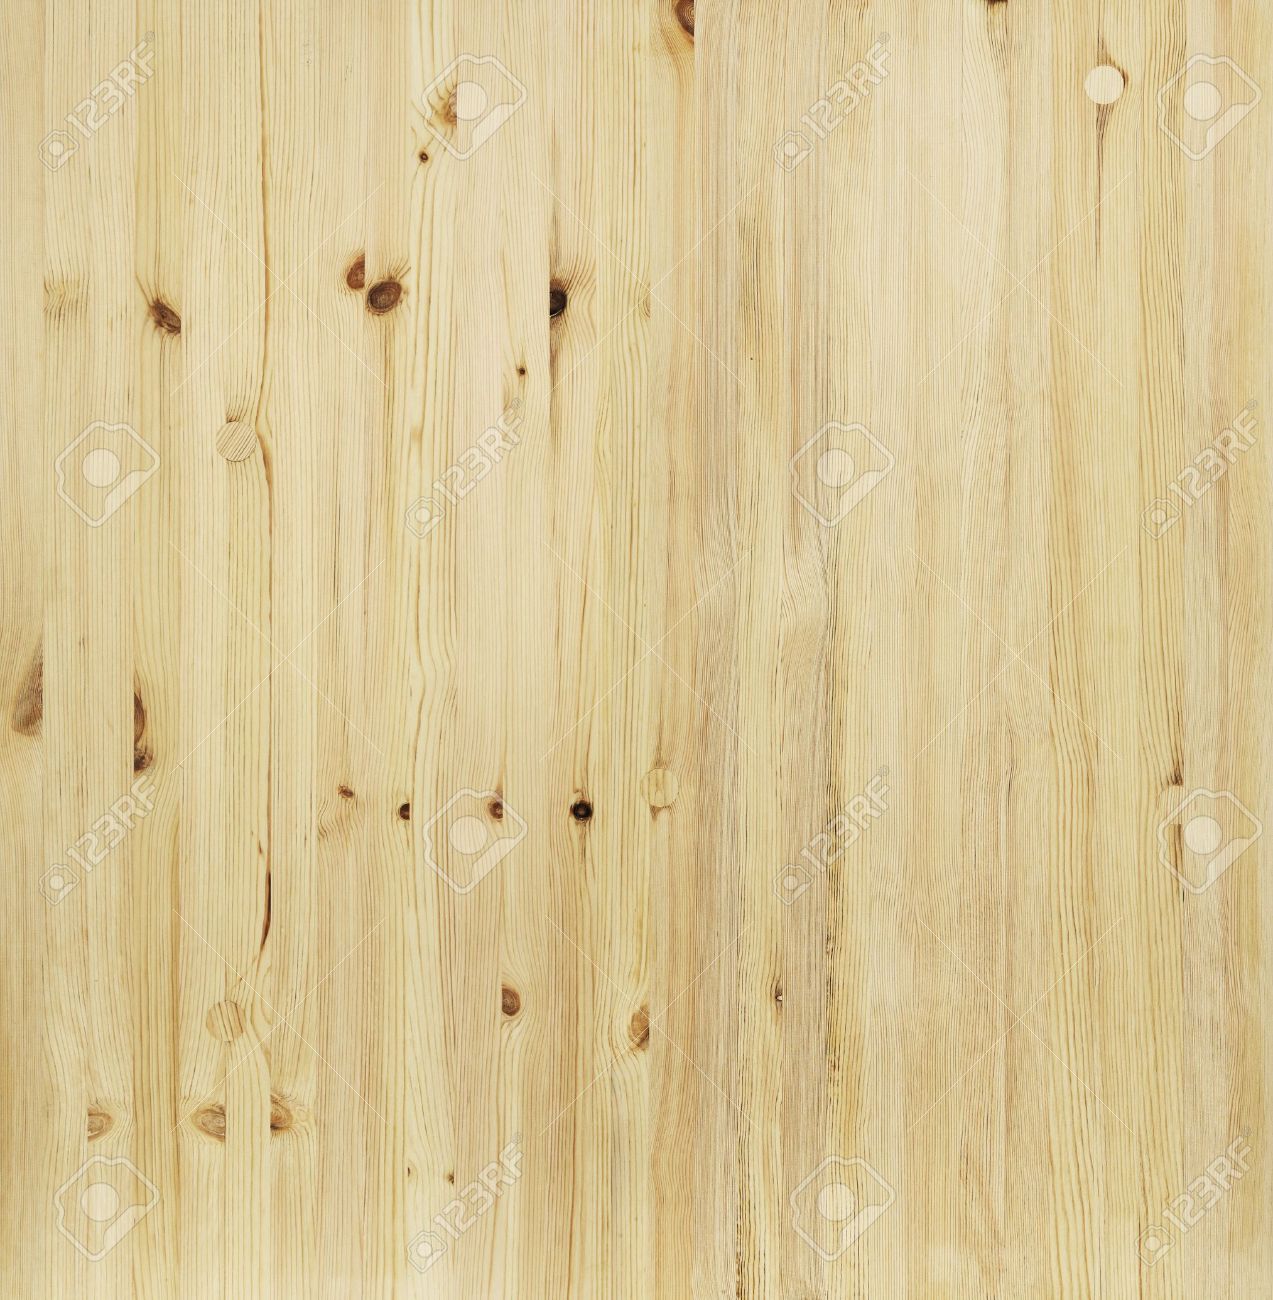 THERMO PINE WOOD